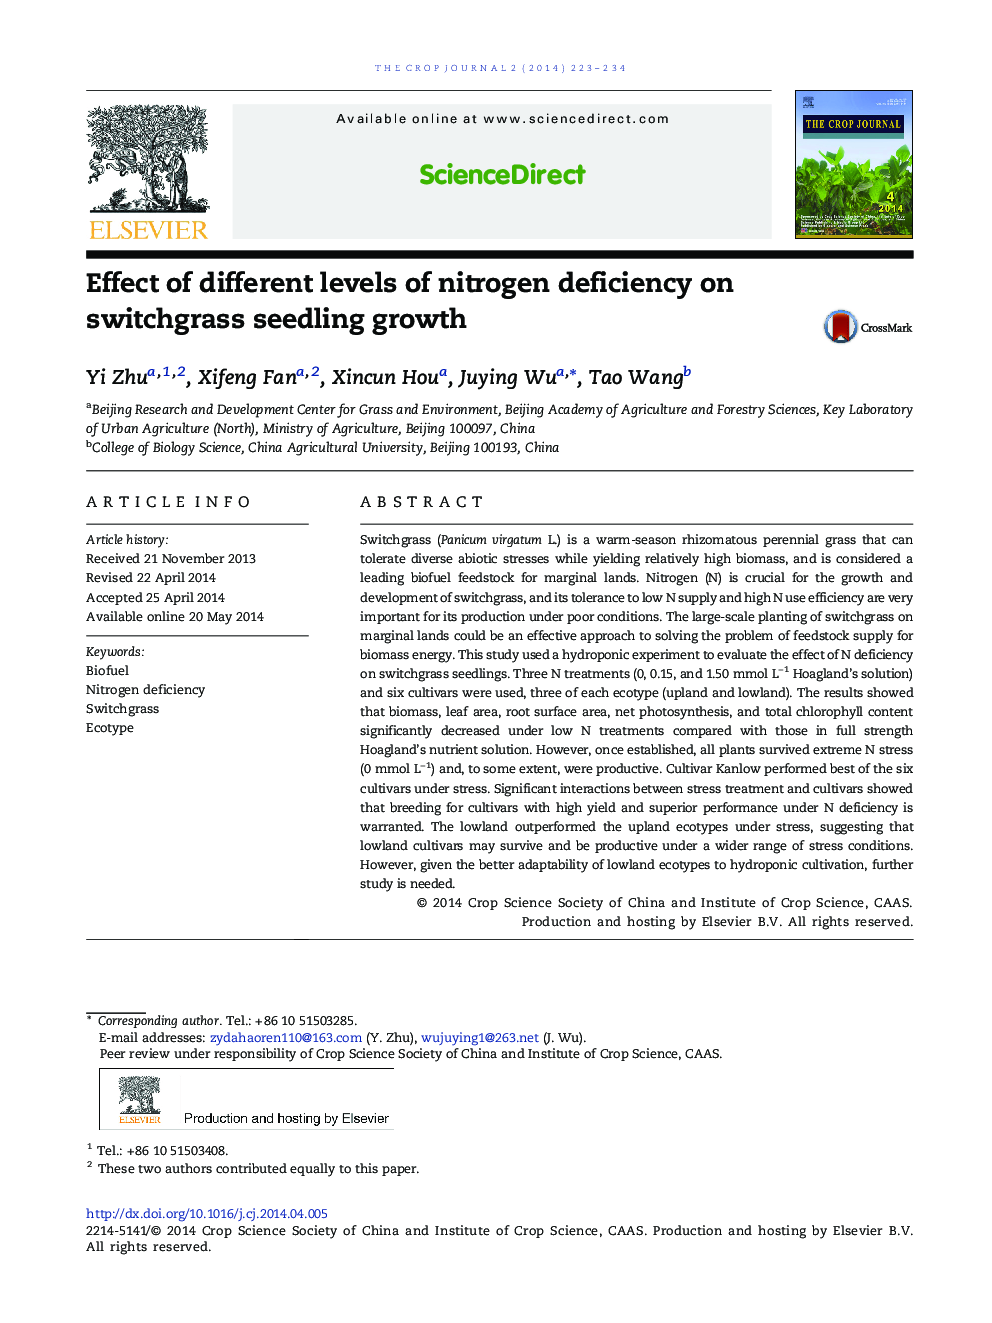 Effect of different levels of nitrogen deficiency on switchgrass seedling growth 